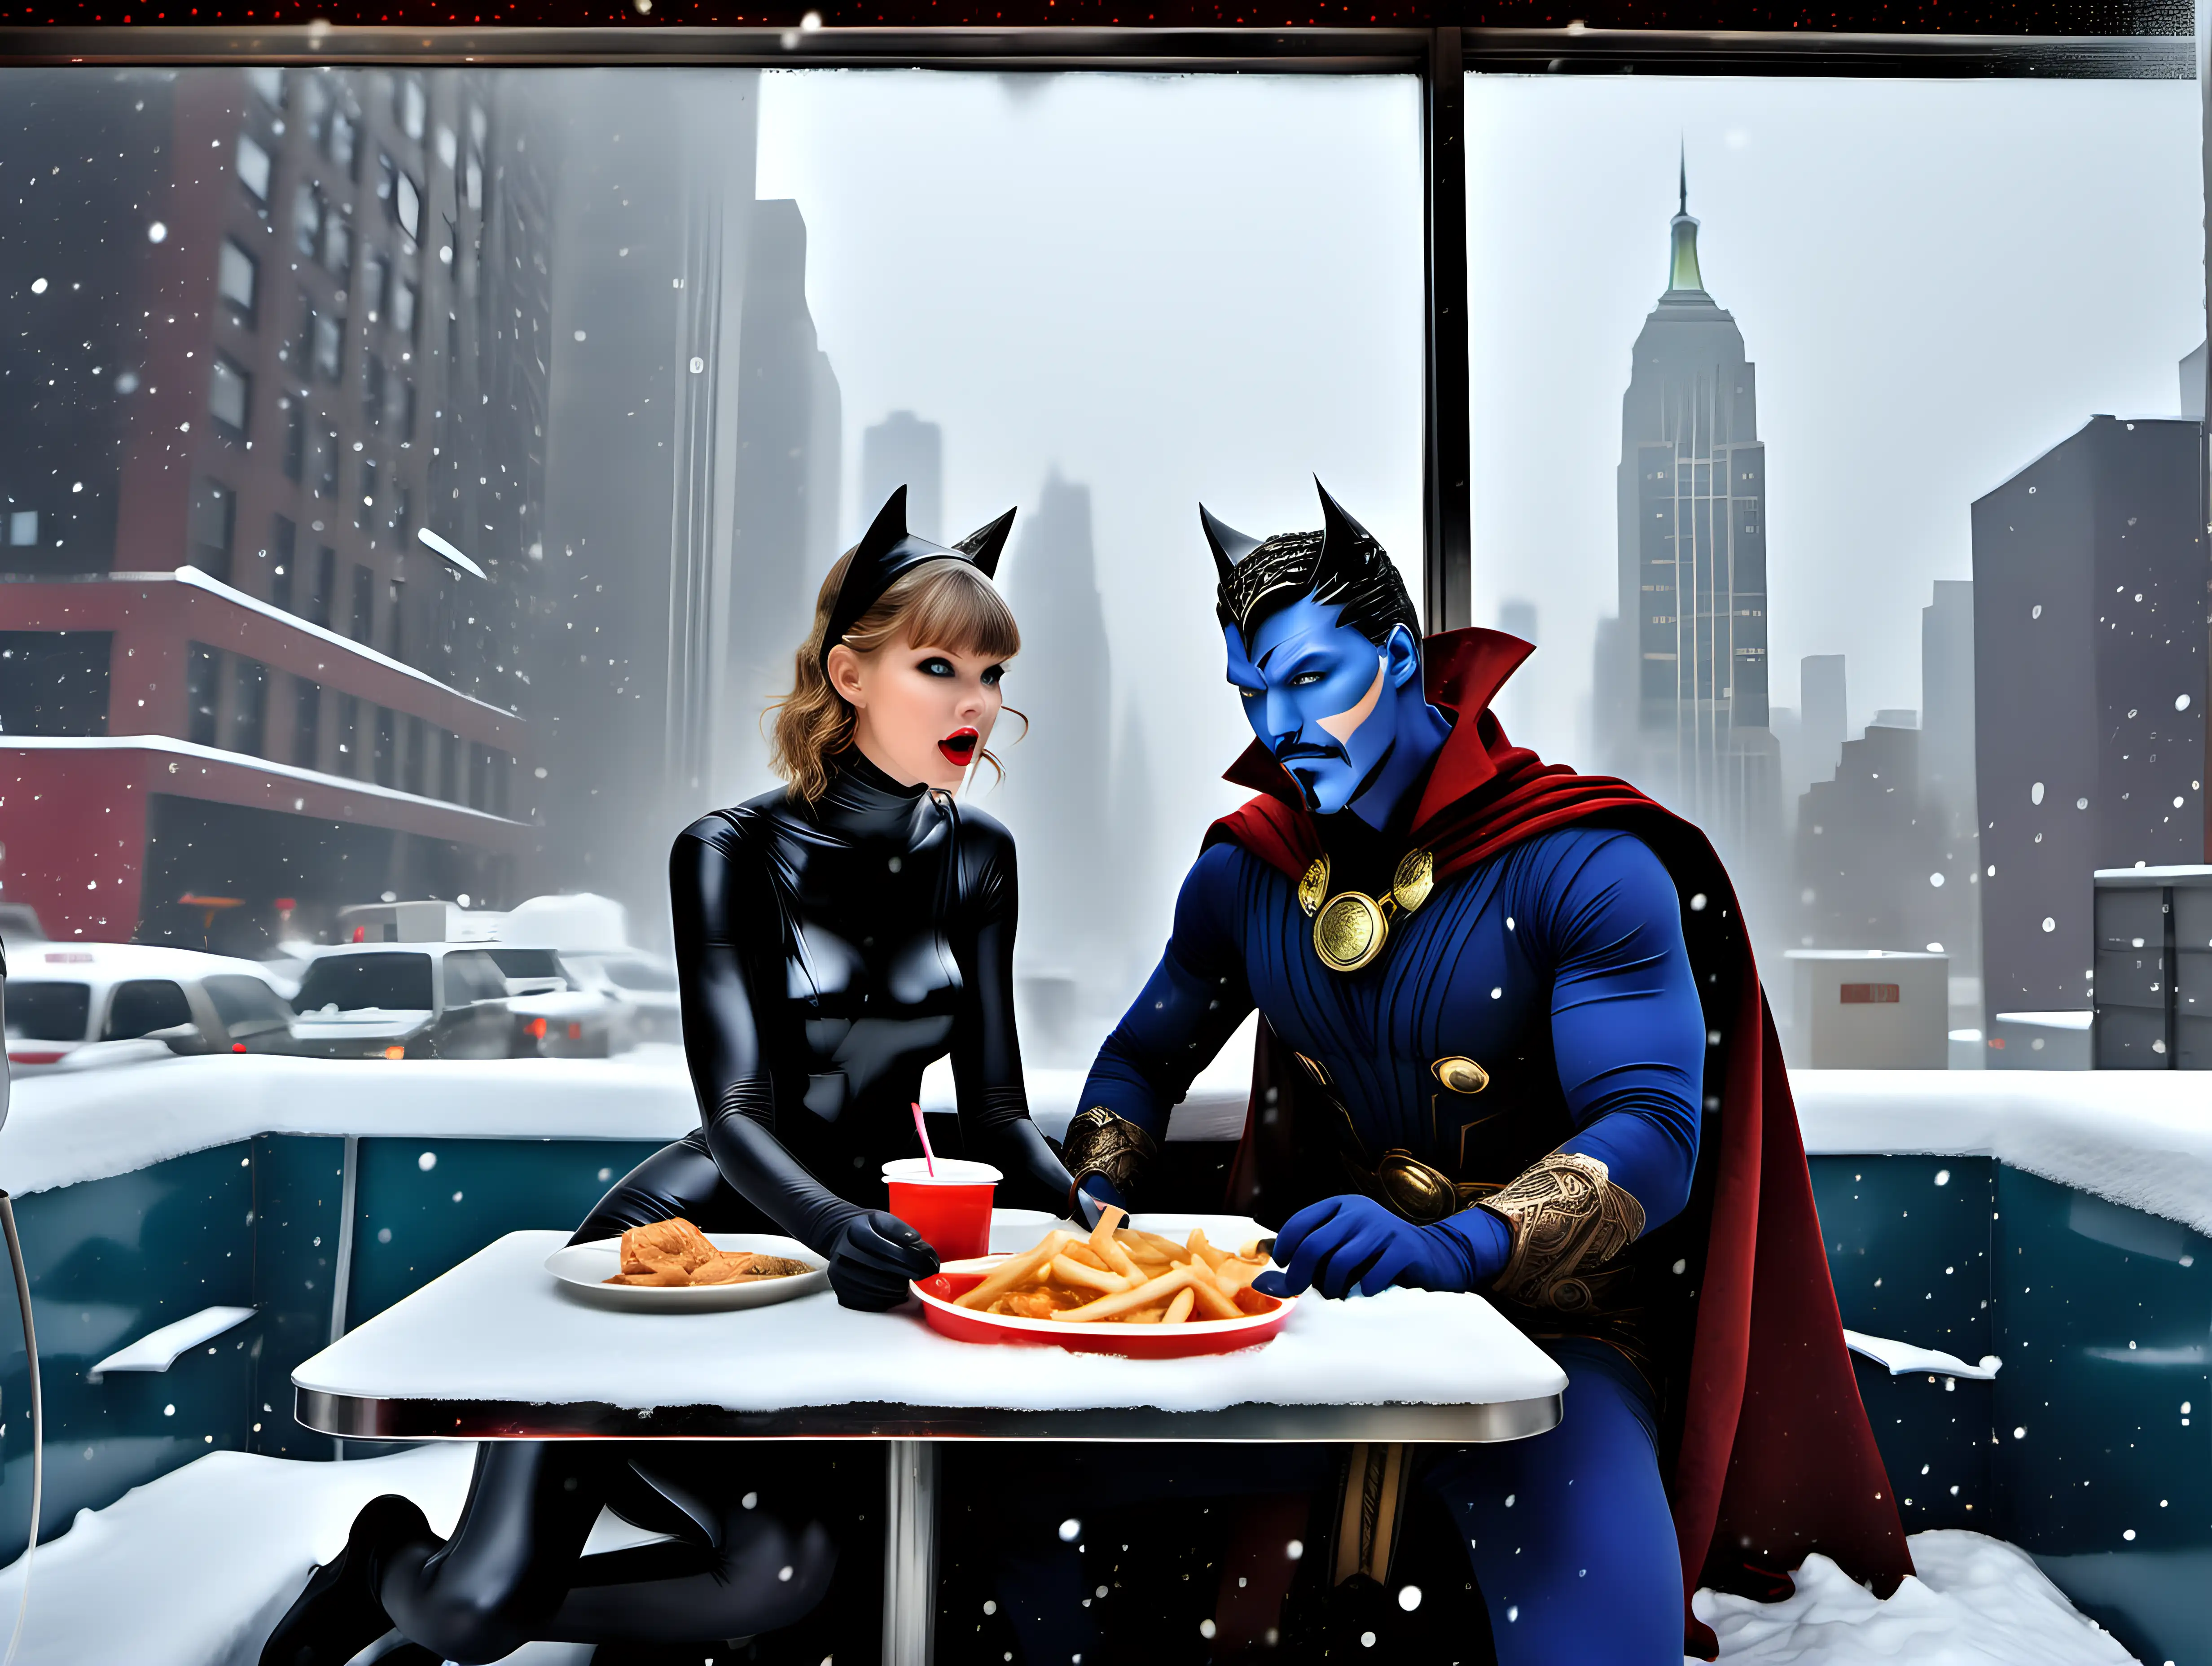 wide view nude Taylor Swift as Cat woman and Doctor Strange on a date in a fast food joint overlooking NYC during a snow storm Frank Frazetta style